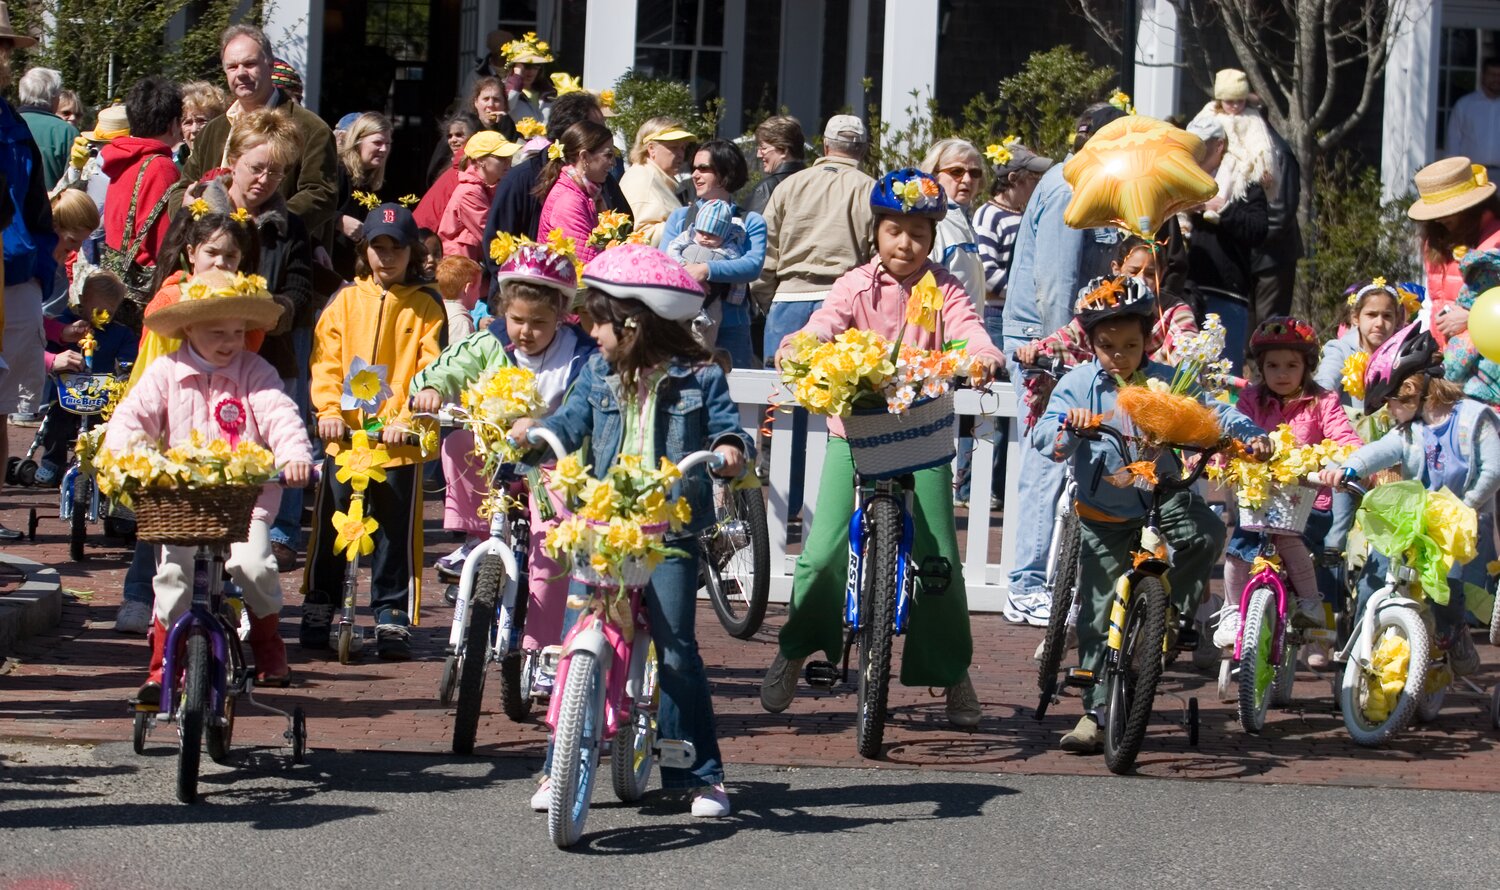 photo by Jim Powers.Scene from the Daffodil Festival events on Saturday, April 29, 2006.